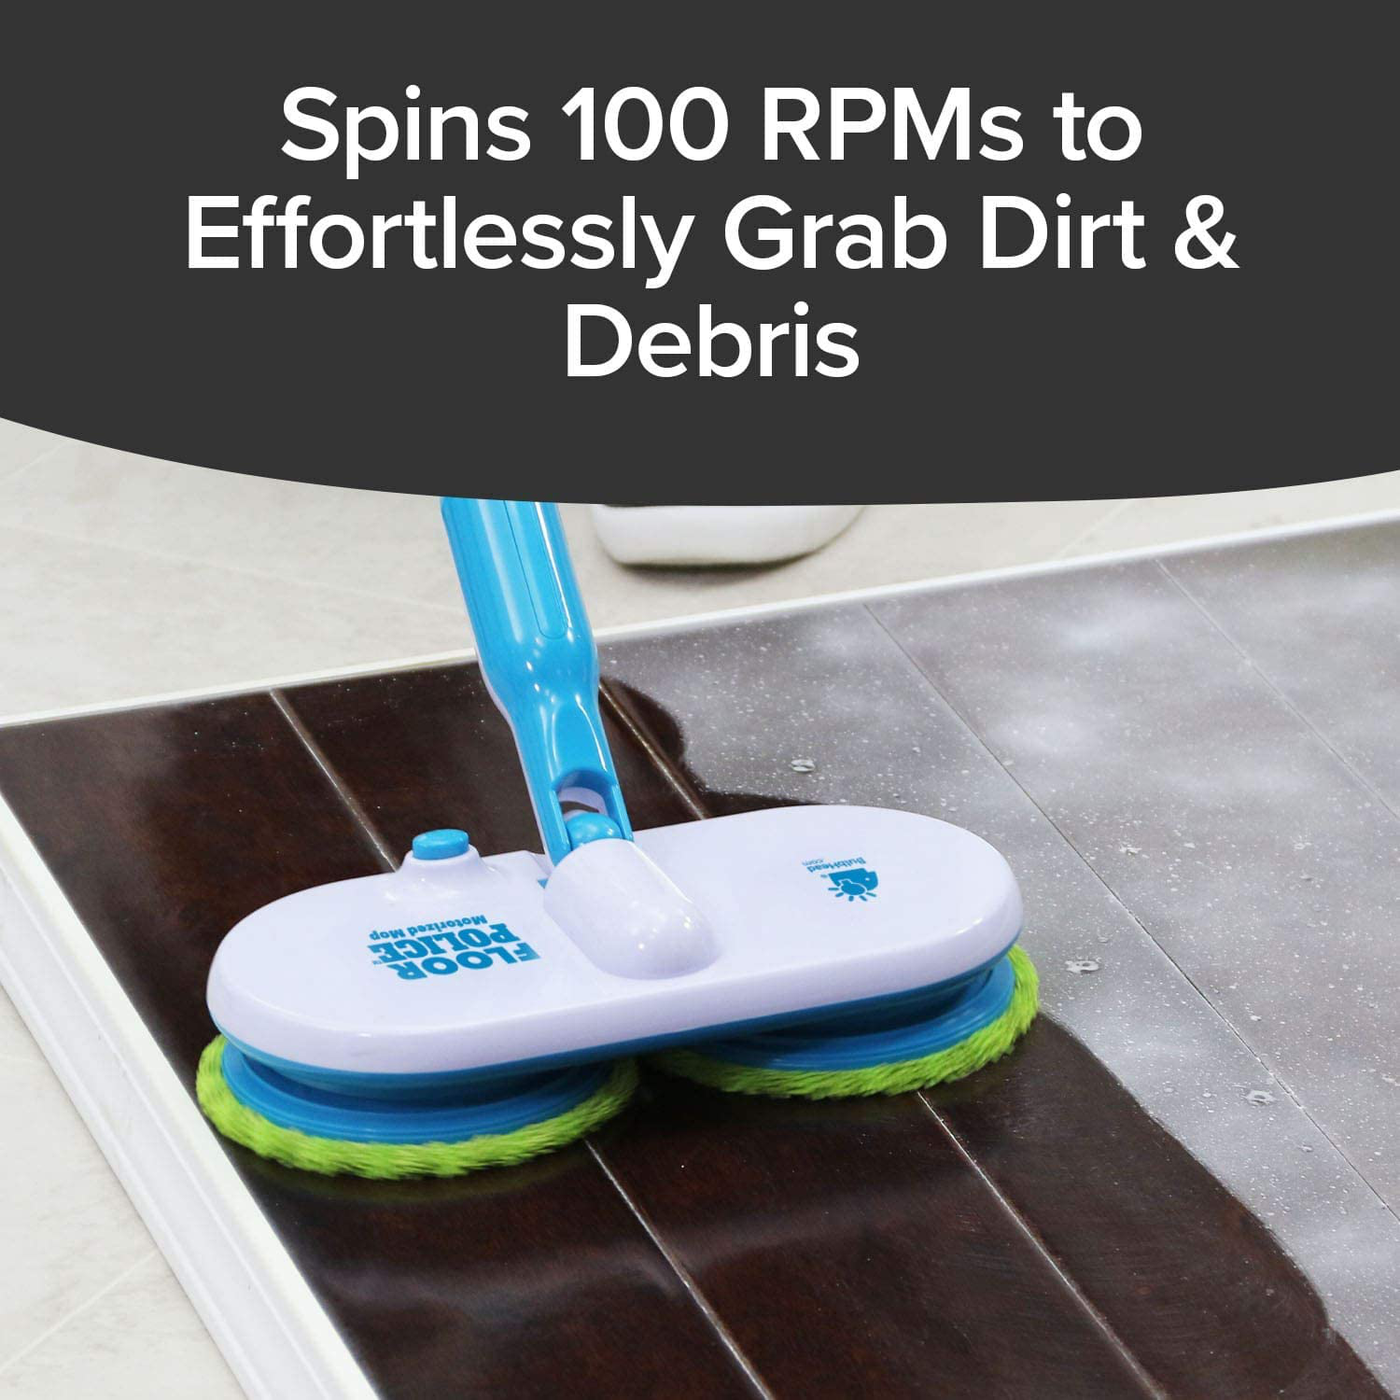 Original As Seen On TV Floor Police Mop with Motorized Dual Spinning Mopheads & 6 Unique Cleaning Pads by BulbHead, Lightweight, Rechargeable & Cordless, Great Hardwood Floor and Tile Cleaner